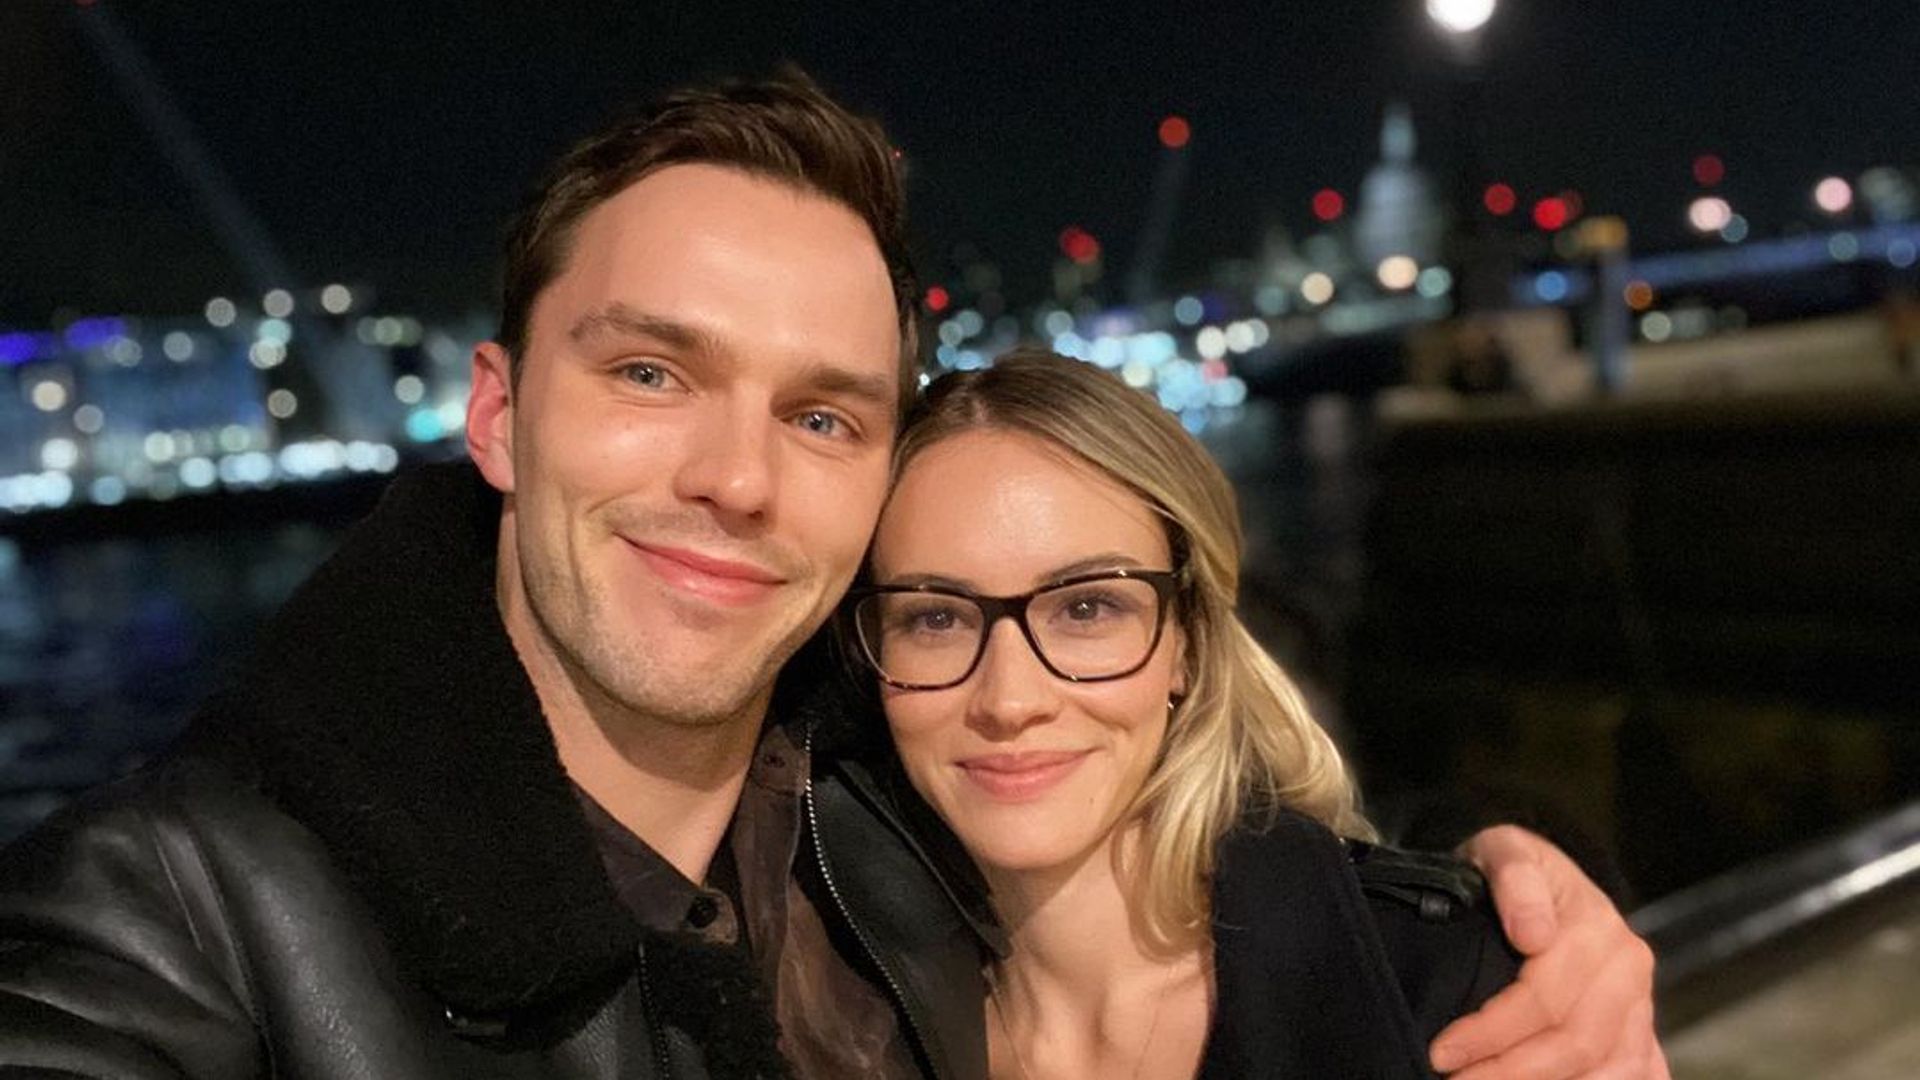 Did Nicholas Hoult secretly get married to Bryana Holly? Here's what we know